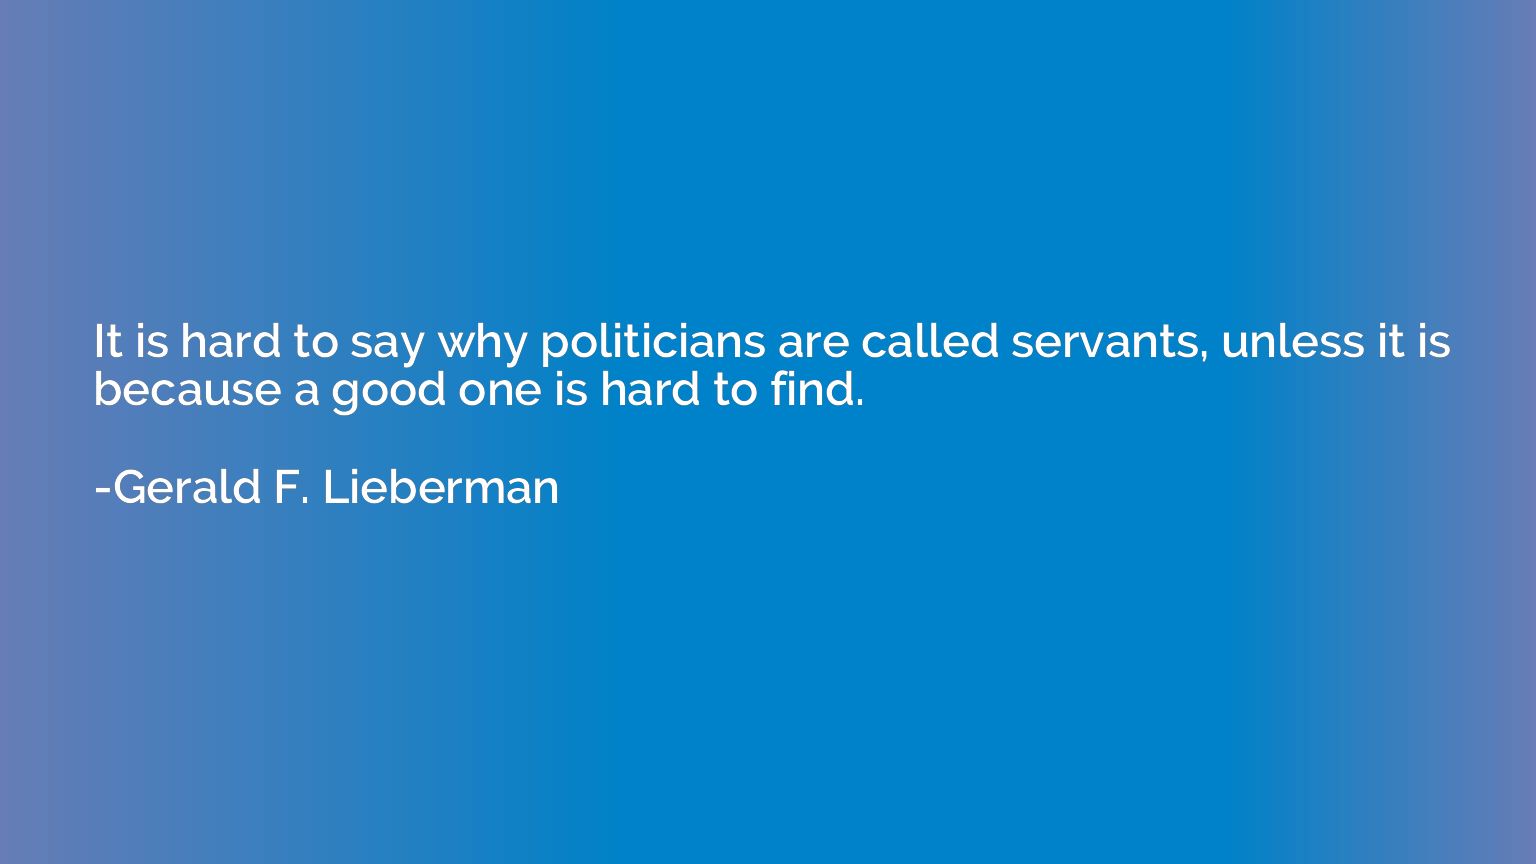 It is hard to say why politicians are called servants, unles